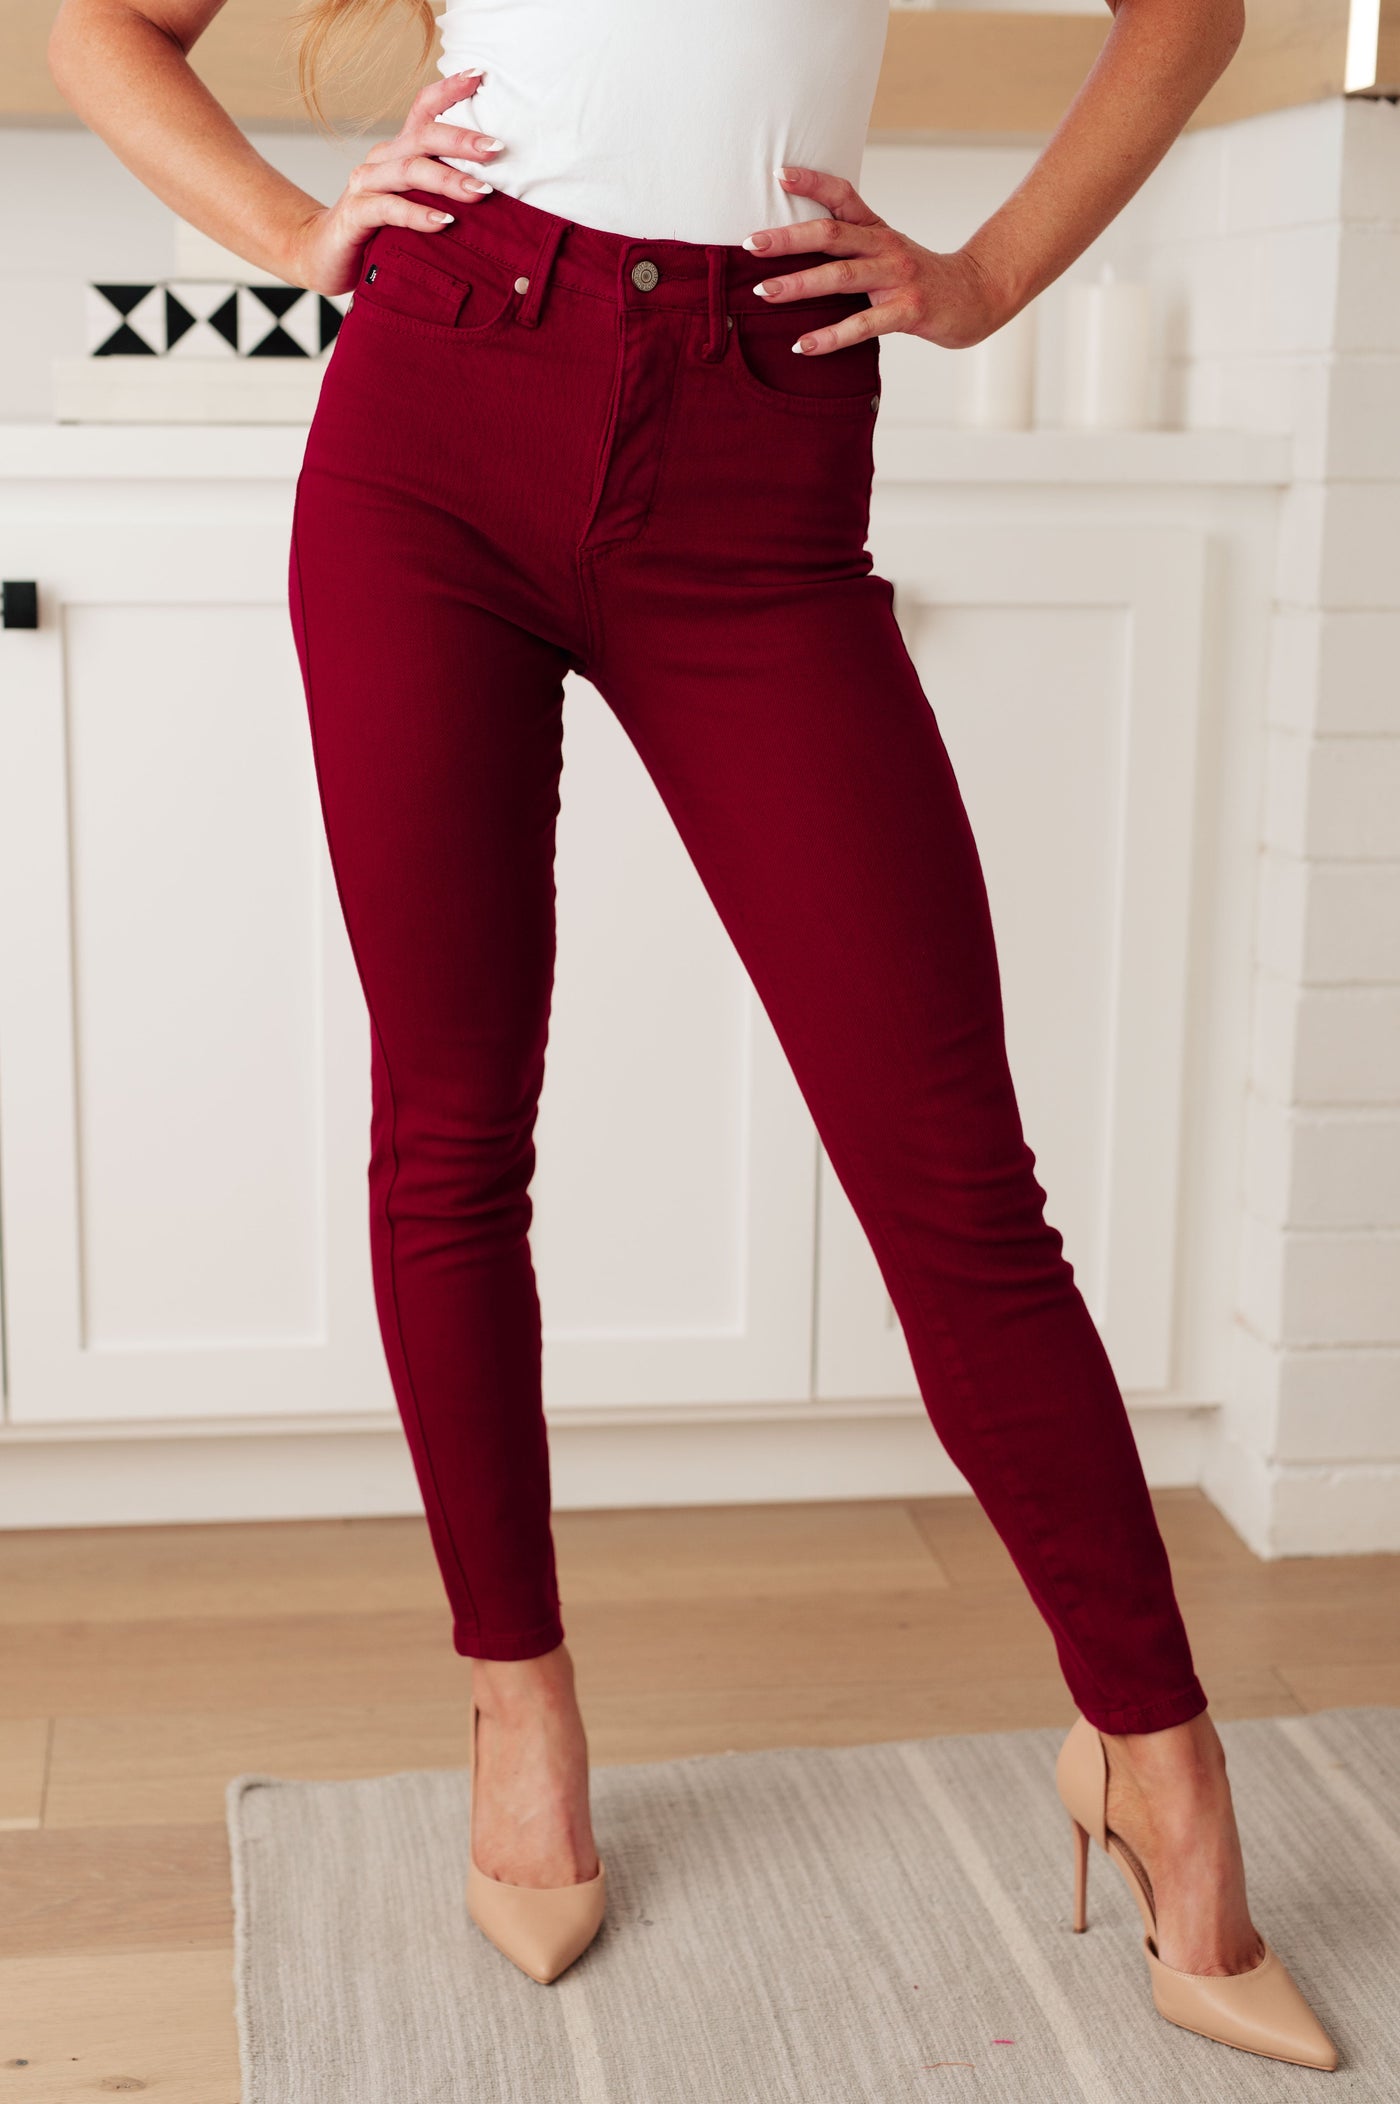 Discover Wanda High Rise Control Top Skinny Jeans from Judy Blue for a flattering and confident fit.